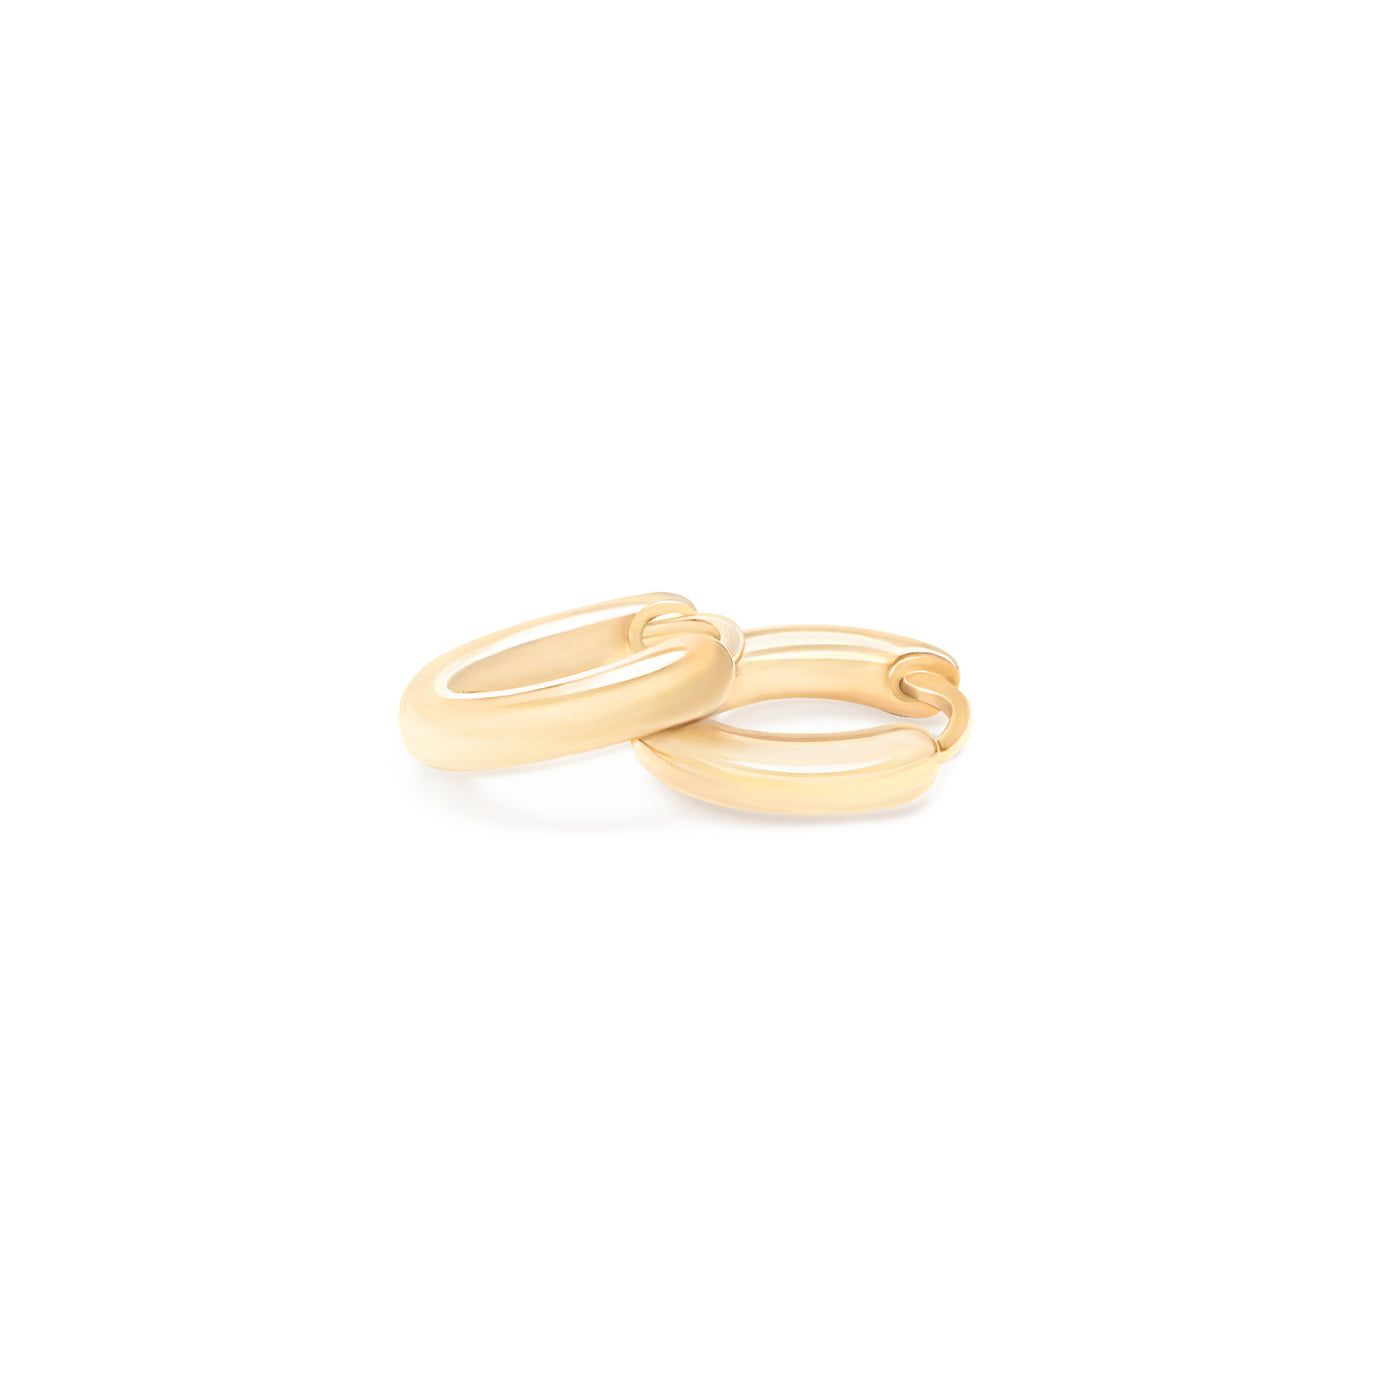 yellow gold hoops on white background